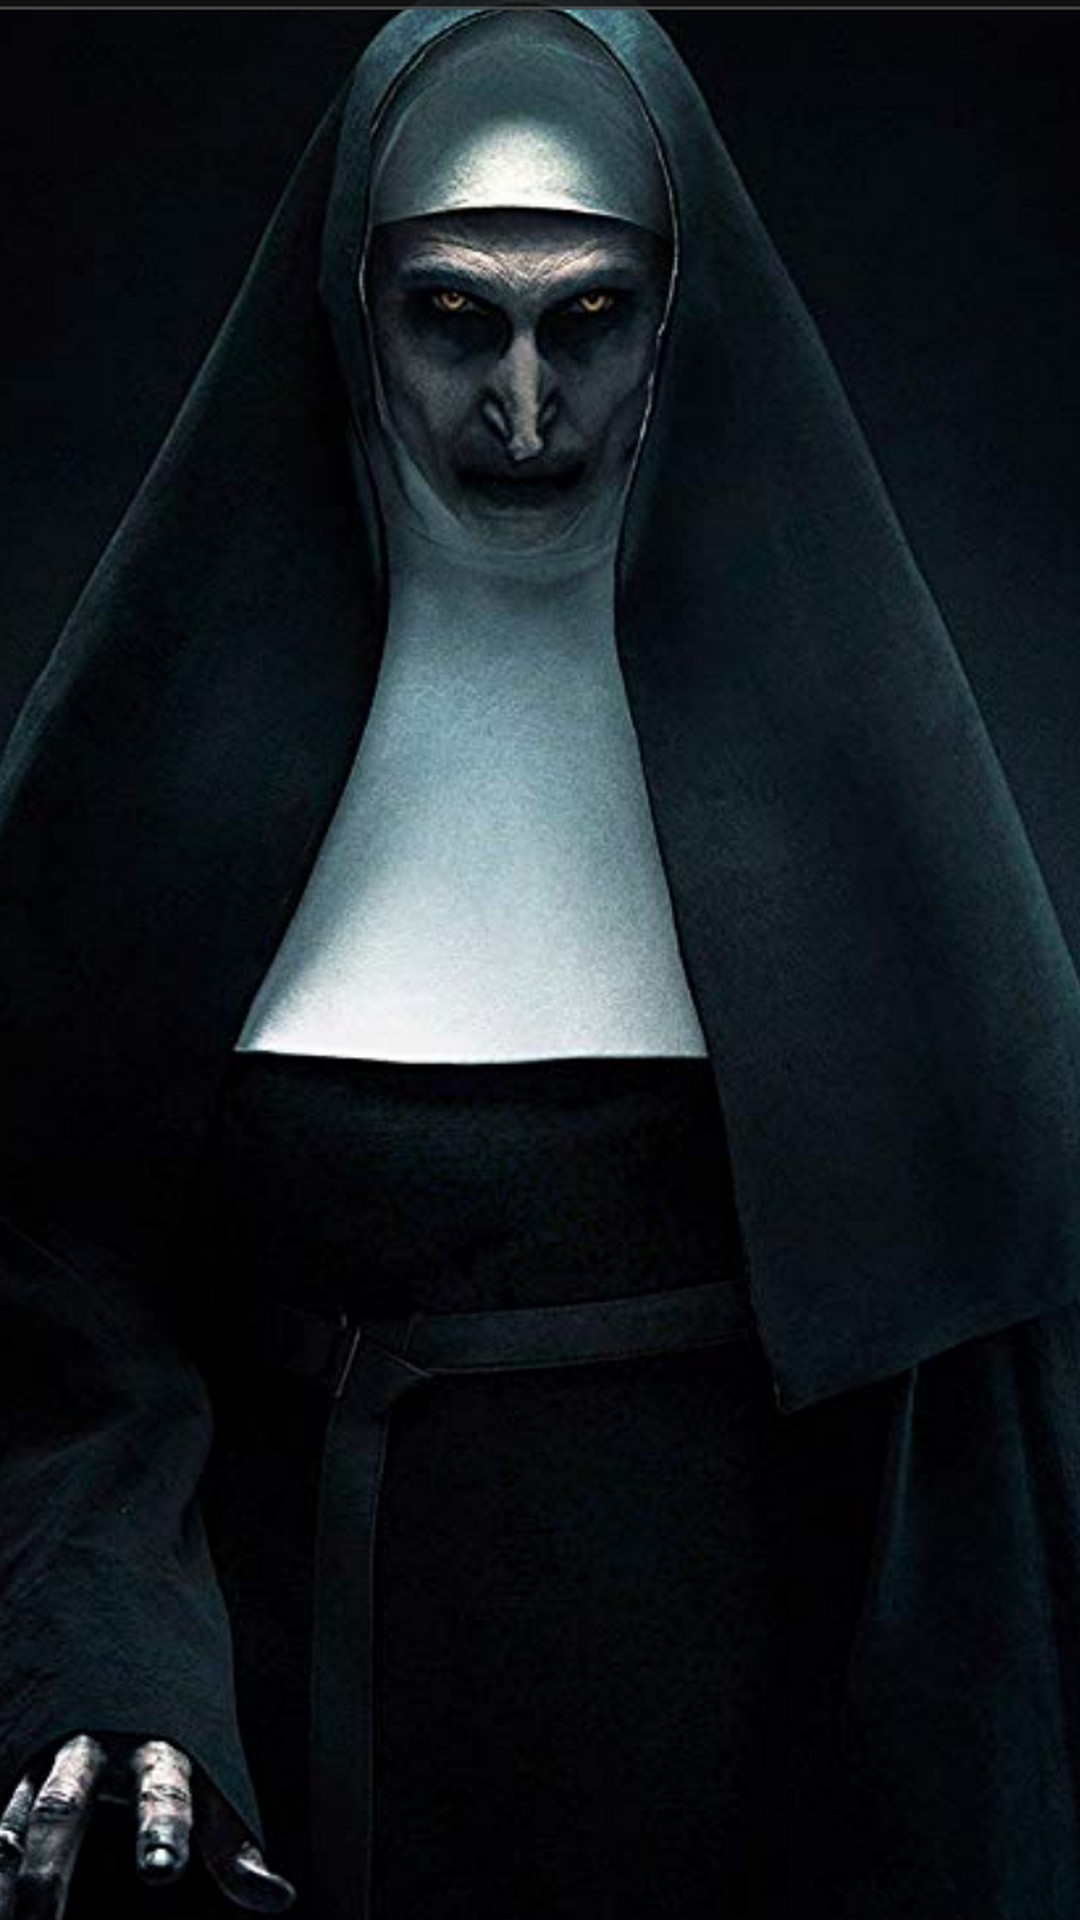 The Nun Android Wallpaper with image resolution 1080x1920 pixel. You can make this wallpaper for your Android backgrounds, Tablet, Smartphones Screensavers and Mobile Phone Lock Screen